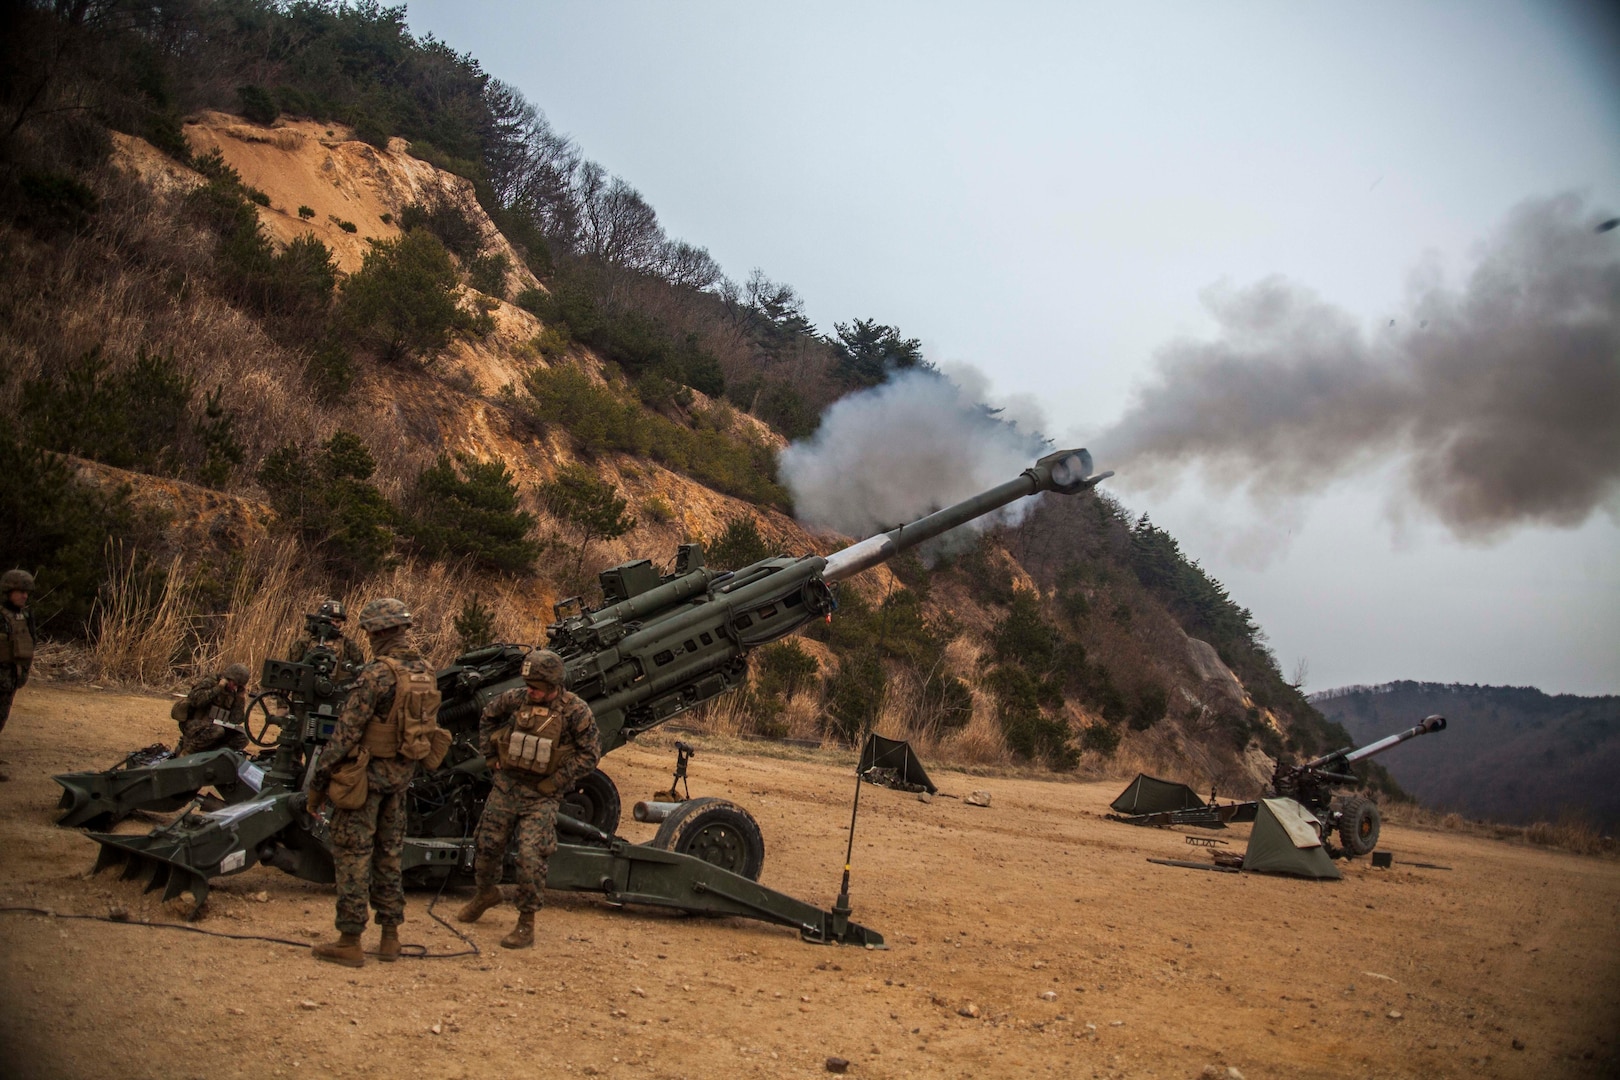 U.S. Marines with Golf Battery, Battalion Landing Team 1st Battalion, 5th Marines, 31st Marine Expeditionary Unit, fire their M777A2 lightweight 155 mm howitzer at Sanseori, South Korea, as part of Exercise Ssang Yong 16, March 15, 2016. Ssang Yong is a biennial combined amphibious exercise conducted by U.S. forces with the Republic of Korea Navy and Marine Corps, Australian Army and Royal New Zealand Army forces in order to strengthen interoperability and working relationships across a wide range of military operations. The Marines and sailors of the 31st MEU are currently deployed to Korea as part of their spring deployment of the Asia-Pacific region. (U.S. Marine Corps Photo by Gunnery Sgt. Ismael Pena/Released)